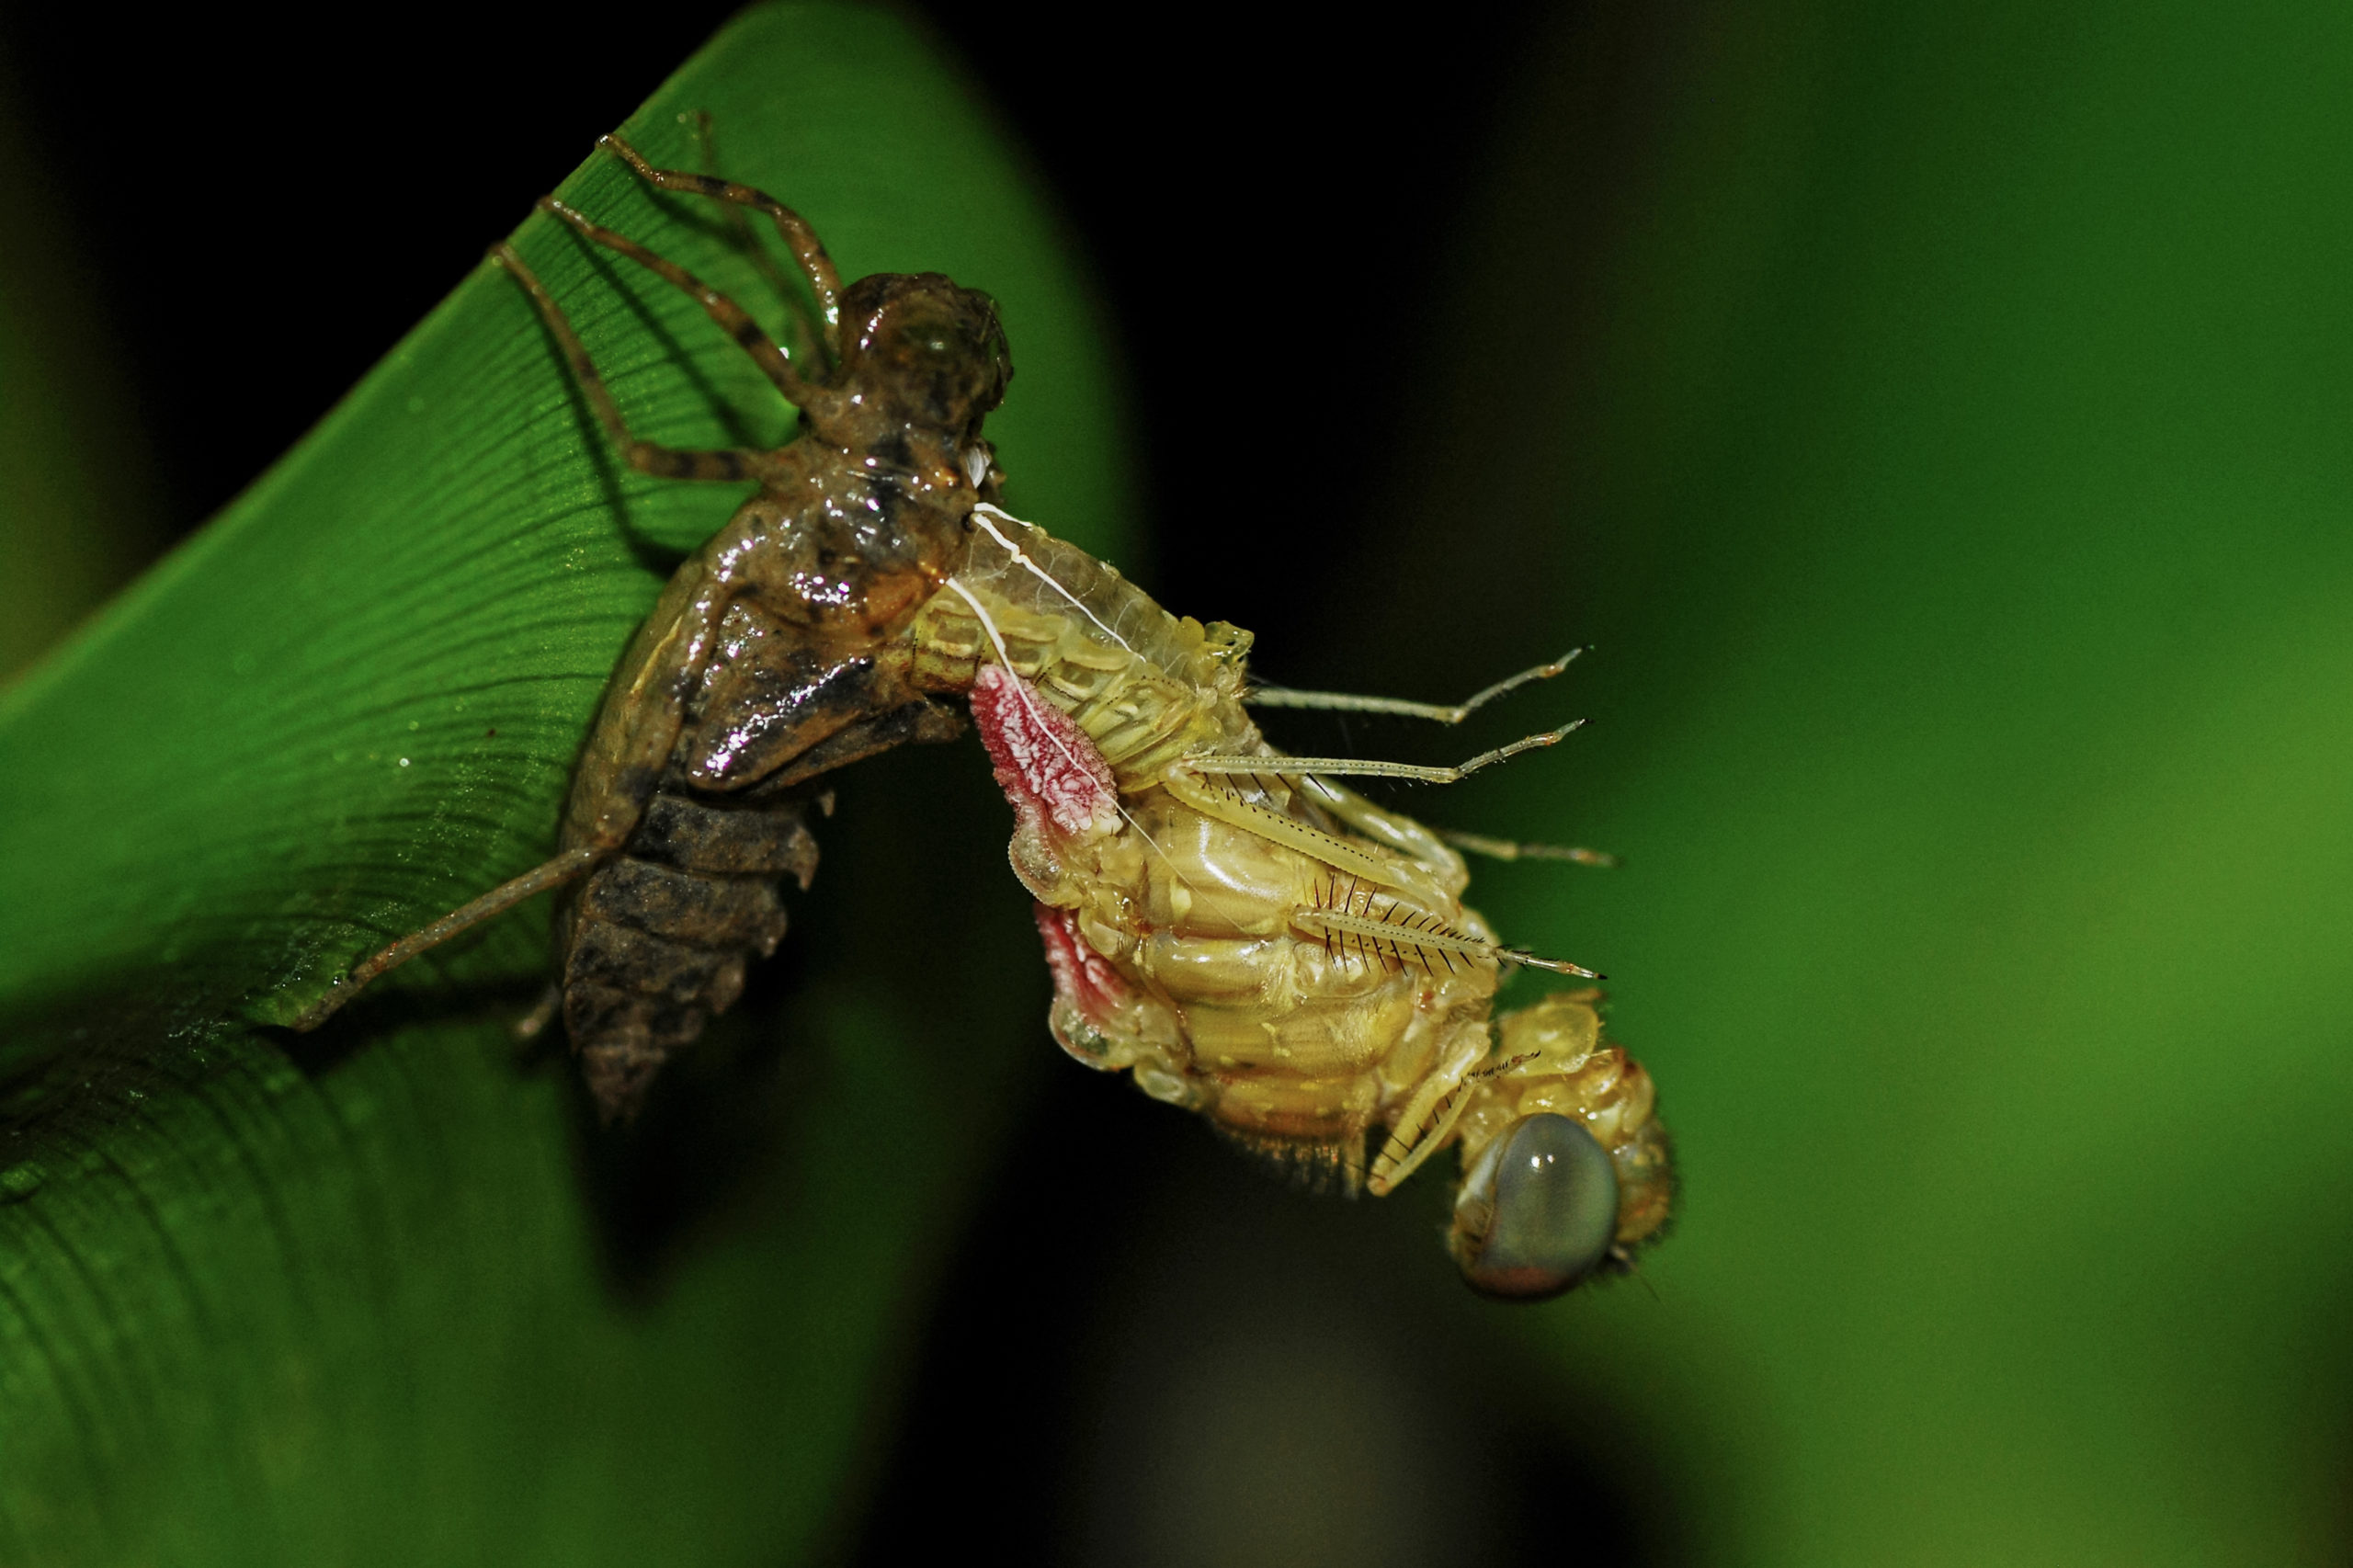 A dragonfly emerging from its nymph